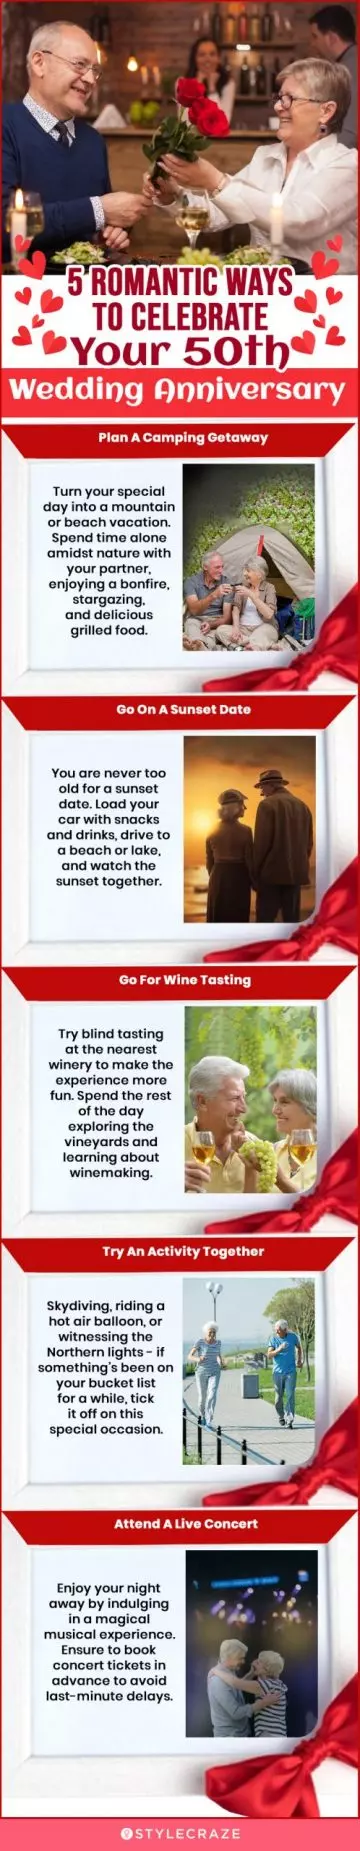 5 romantic ways to celebrate your 50th wedding anniversary (infographic)